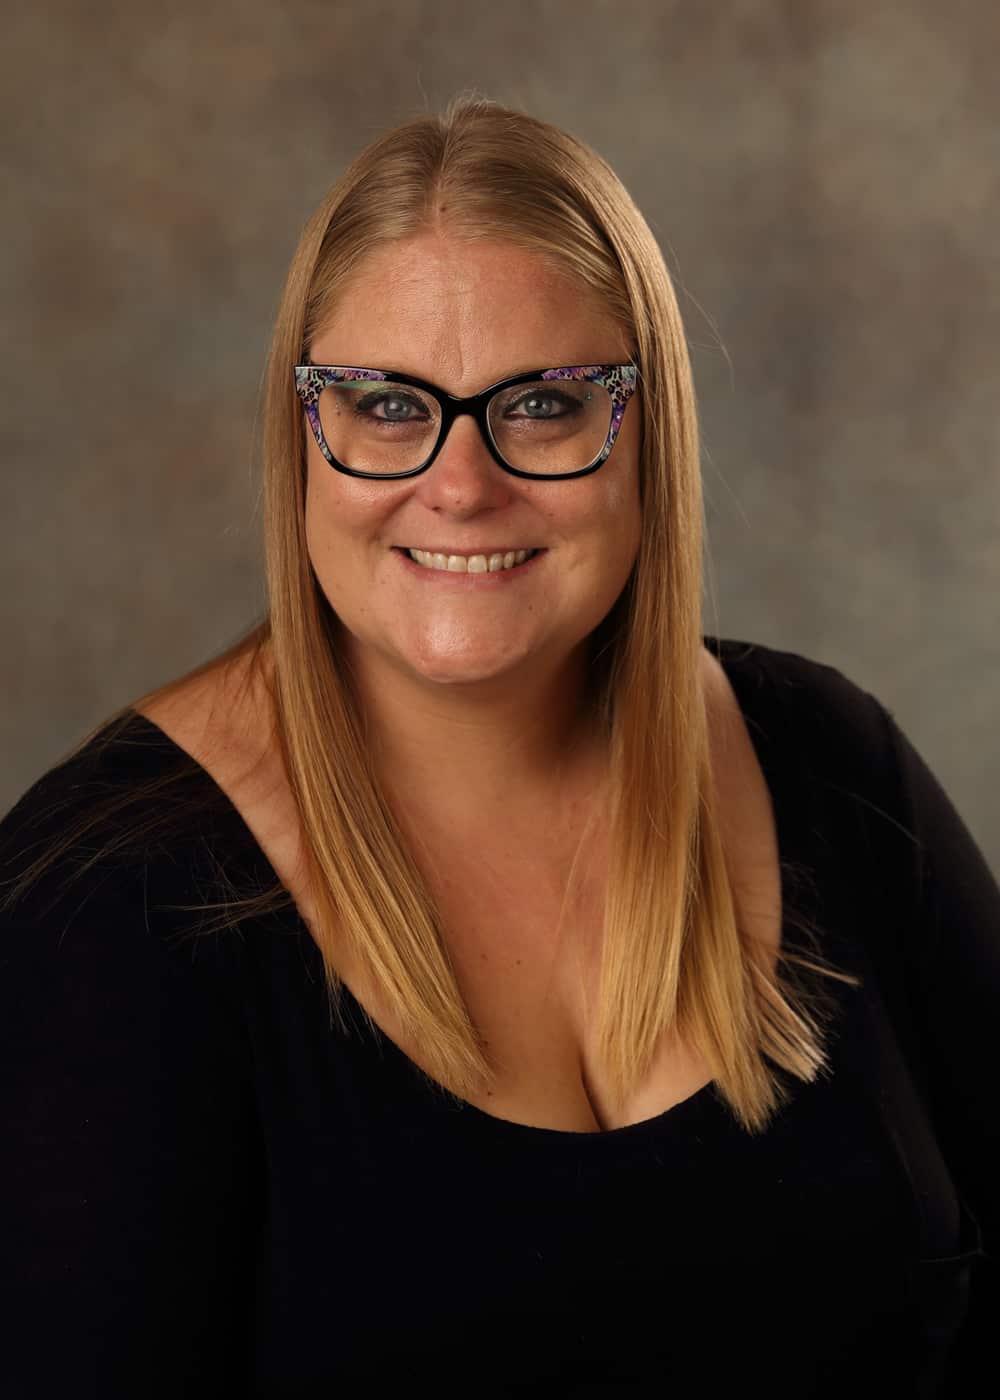 A photo of Executive Director Ashley Harms. She is a Caucasian woman with long blonde hair, blue eyes, and glasses with black and floral frames.